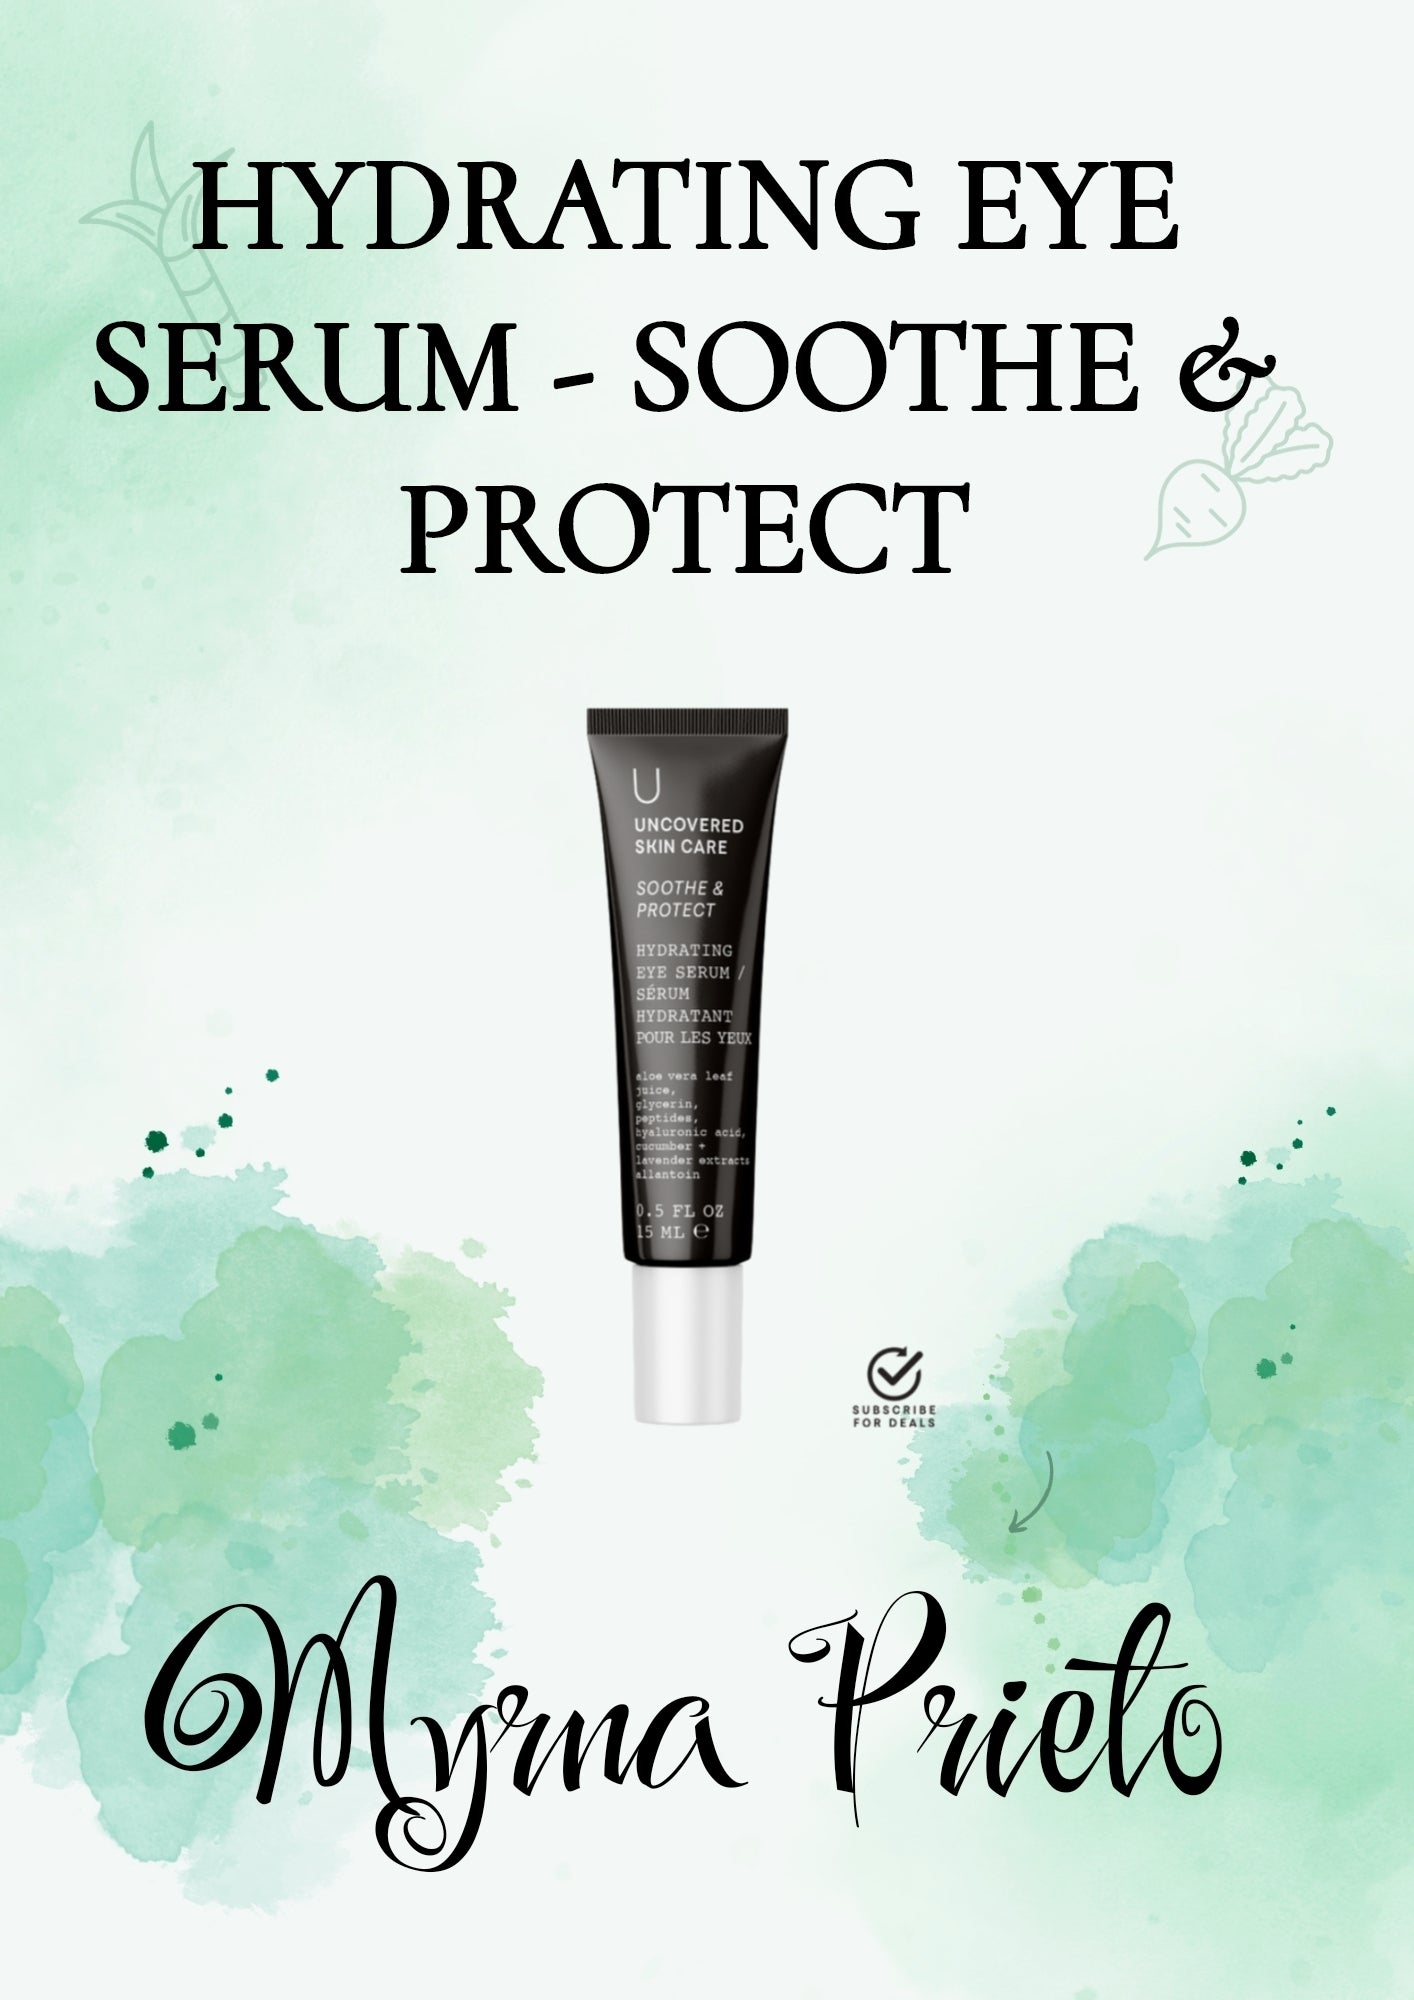 HYDRATING EYE SERUM - SOOTHE & PROTECT